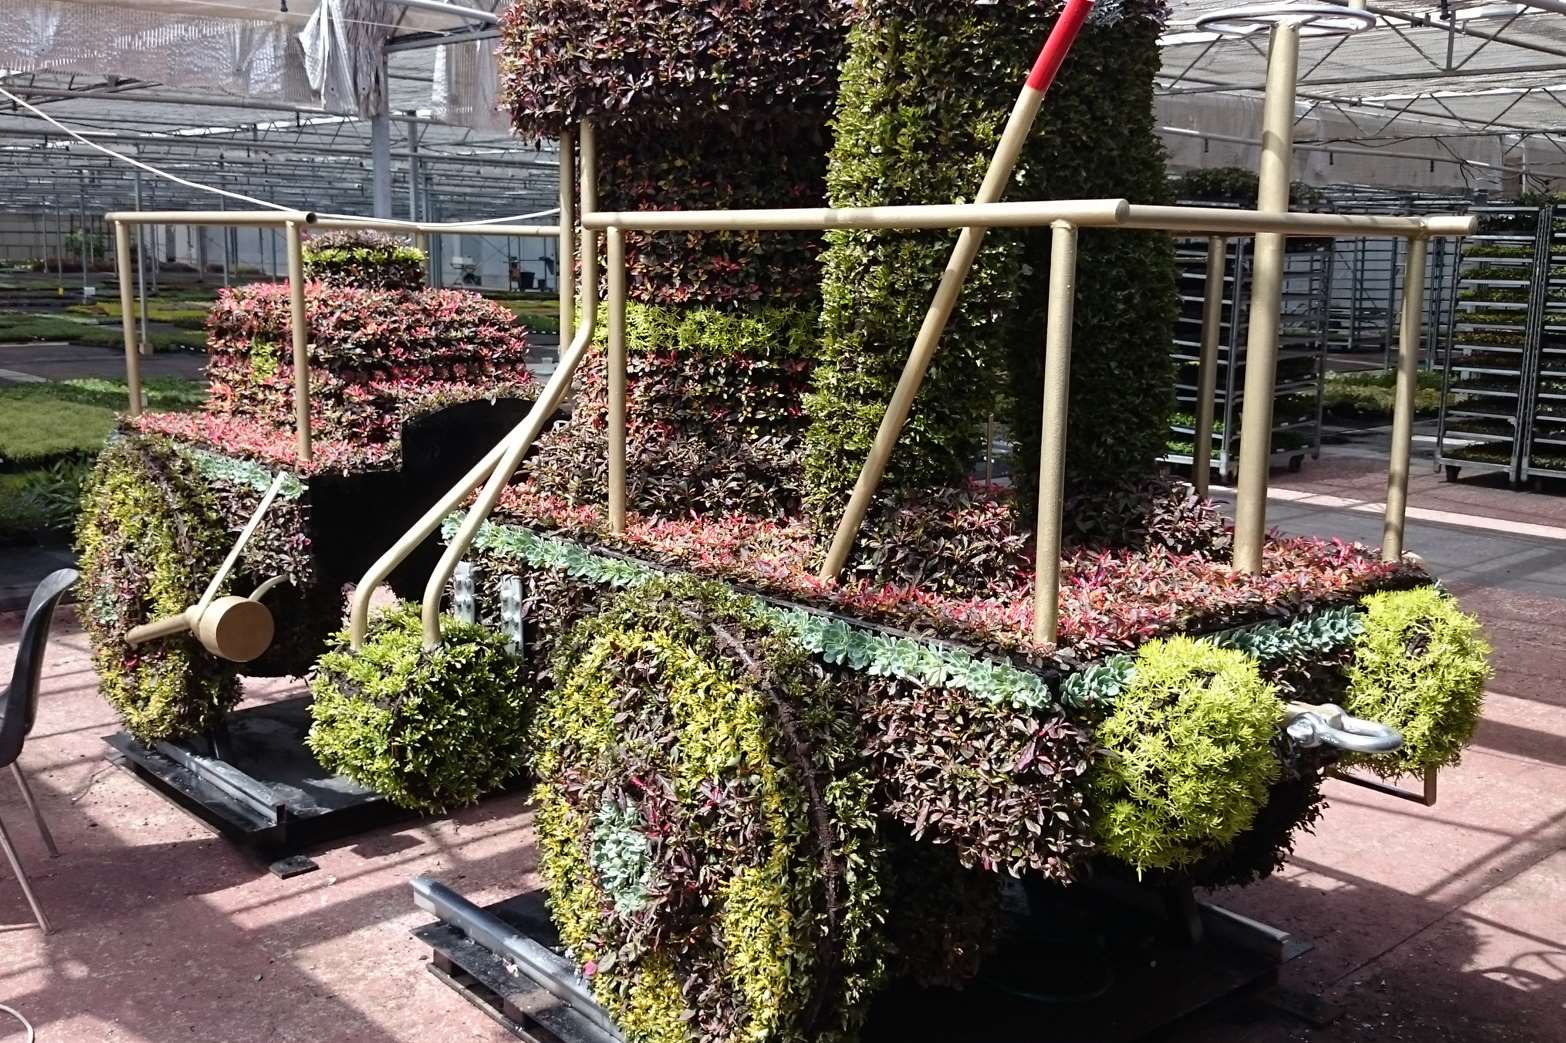 The Coffee Pot Train floral installation will be moved to the car park later this week